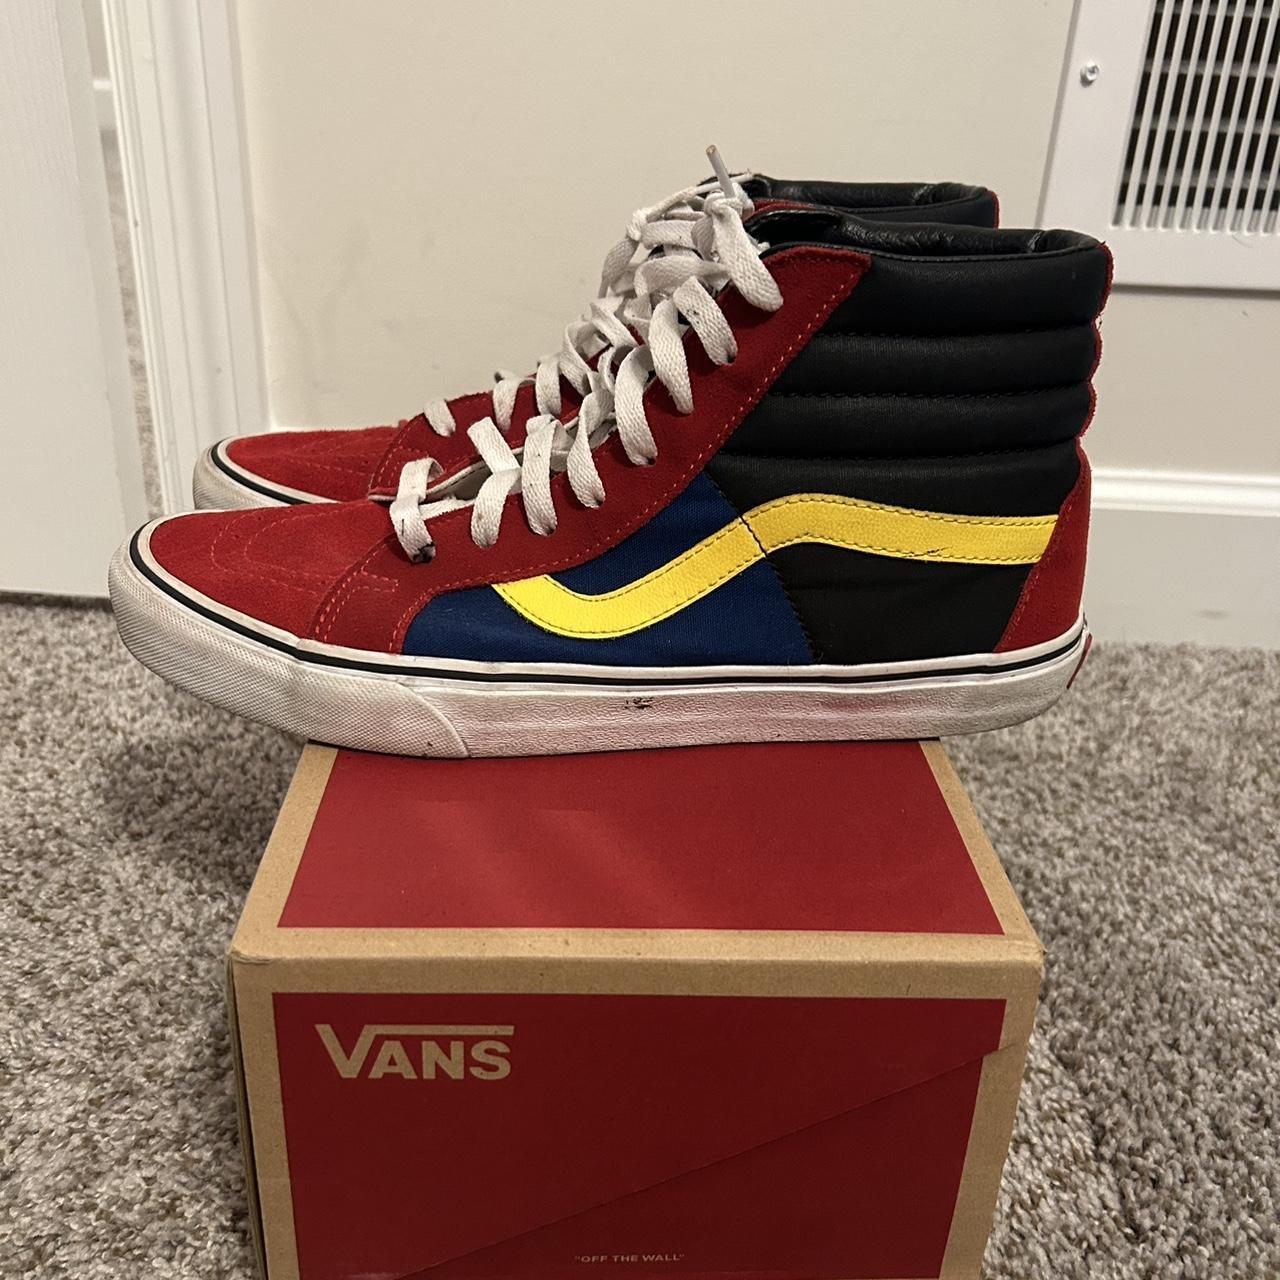 Vans Men's Red and Yellow Trainers (3)